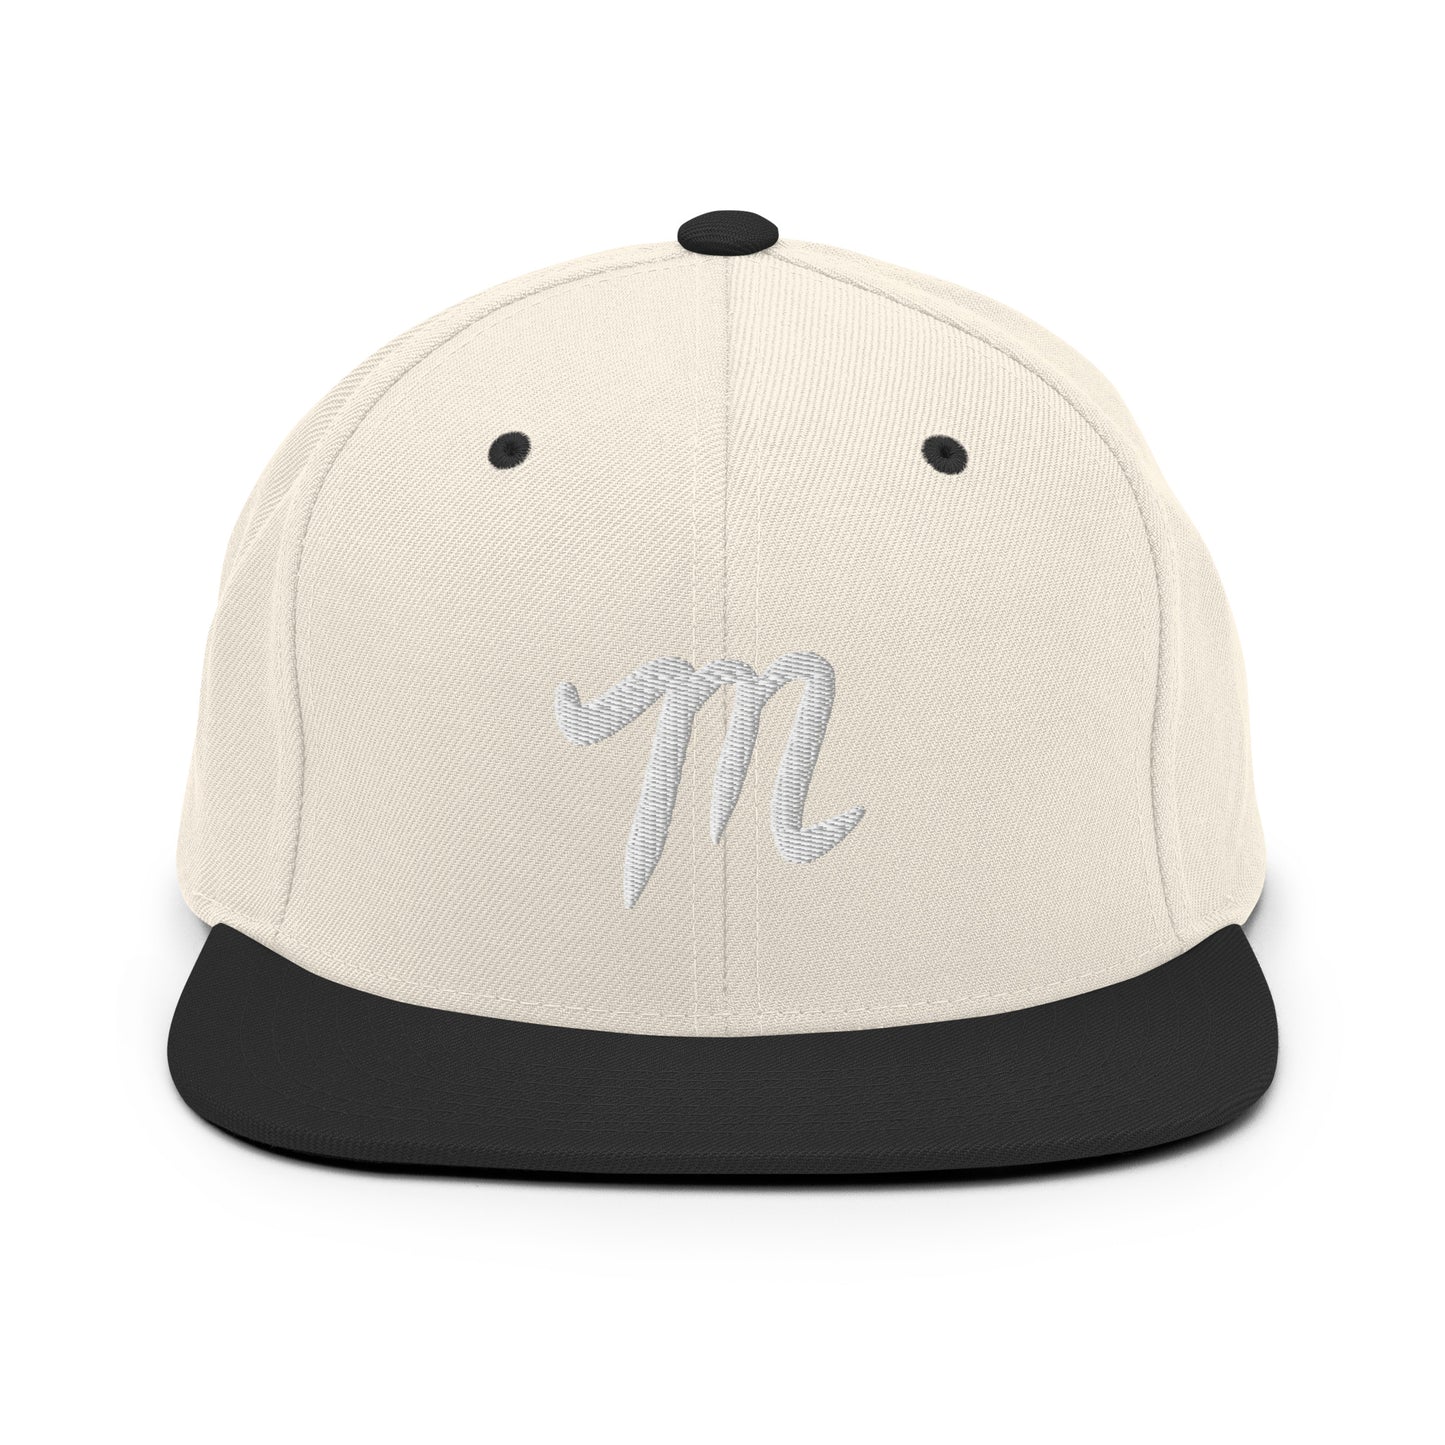 Manolo WHITE M Snapback Hat ANY COLOR HAT